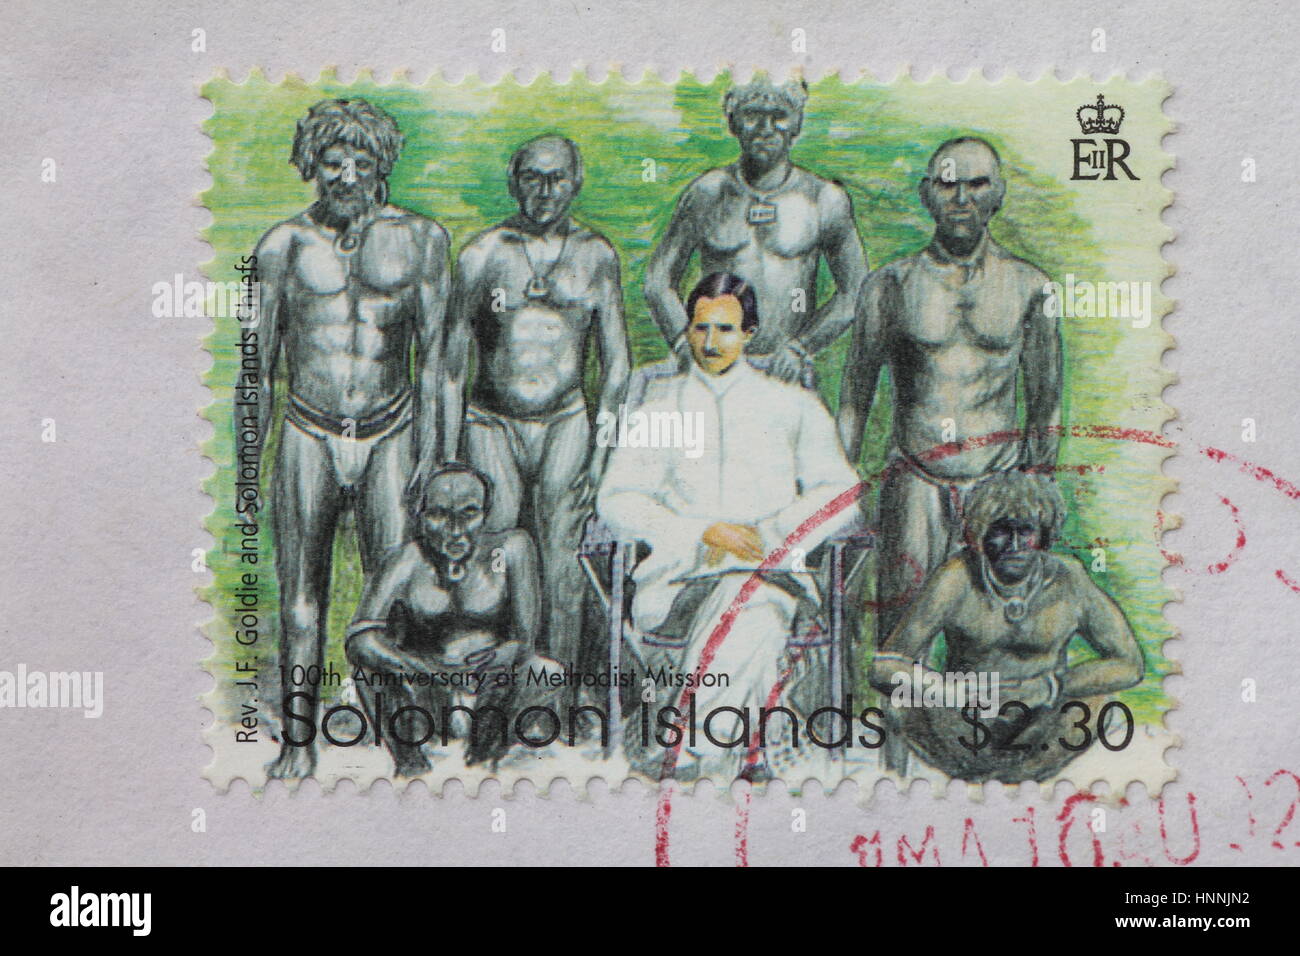 Stamps from the Solomon Islands Stock Photo